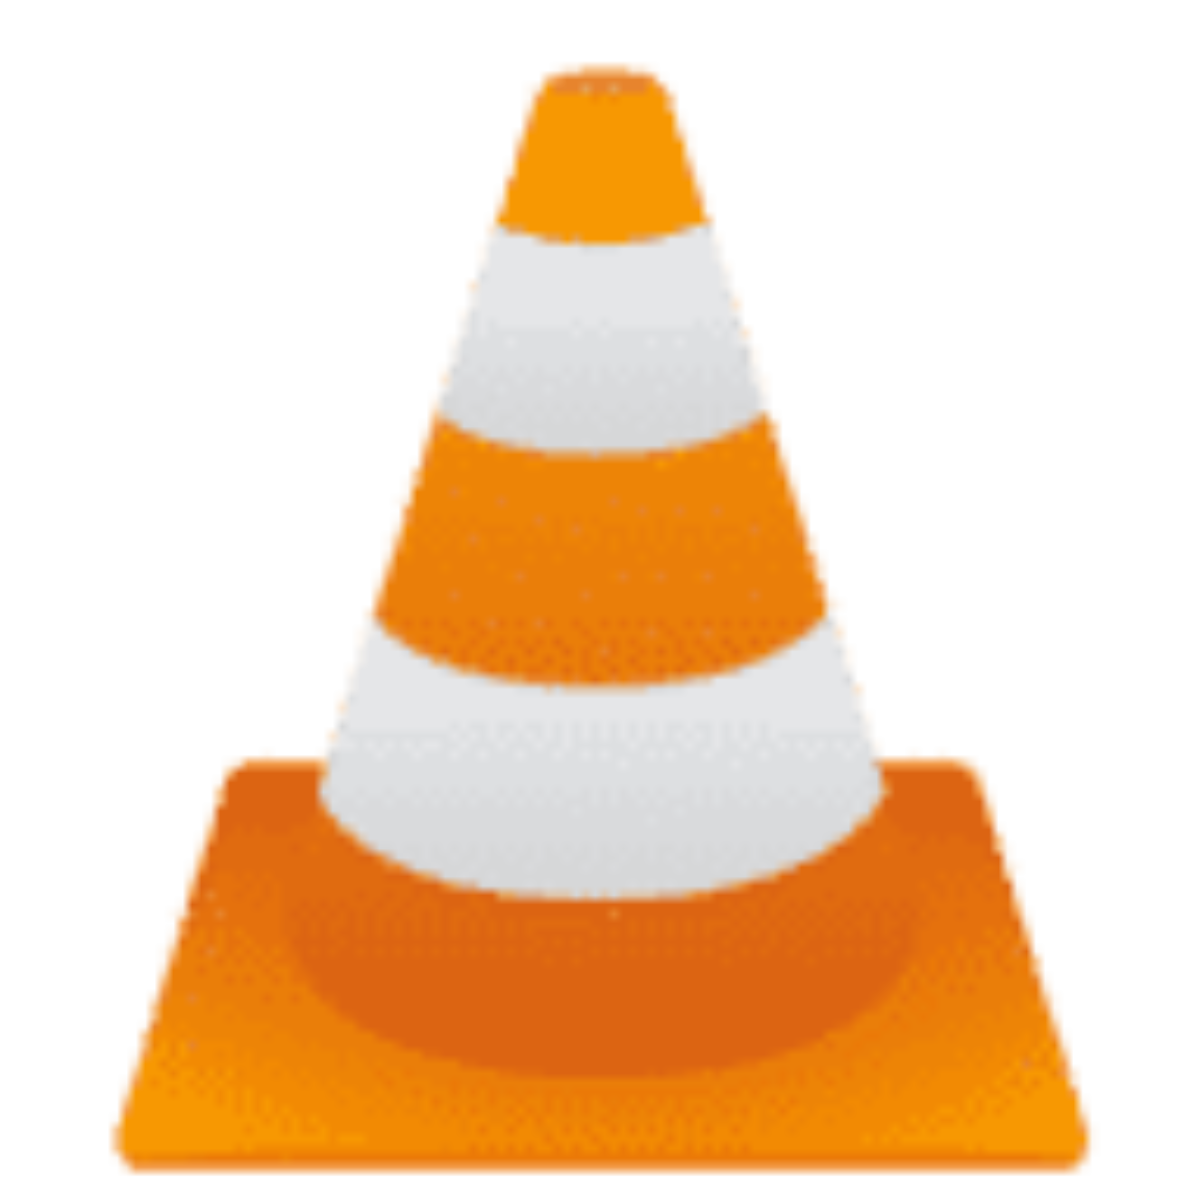 vlc media player for mac 10.9.5